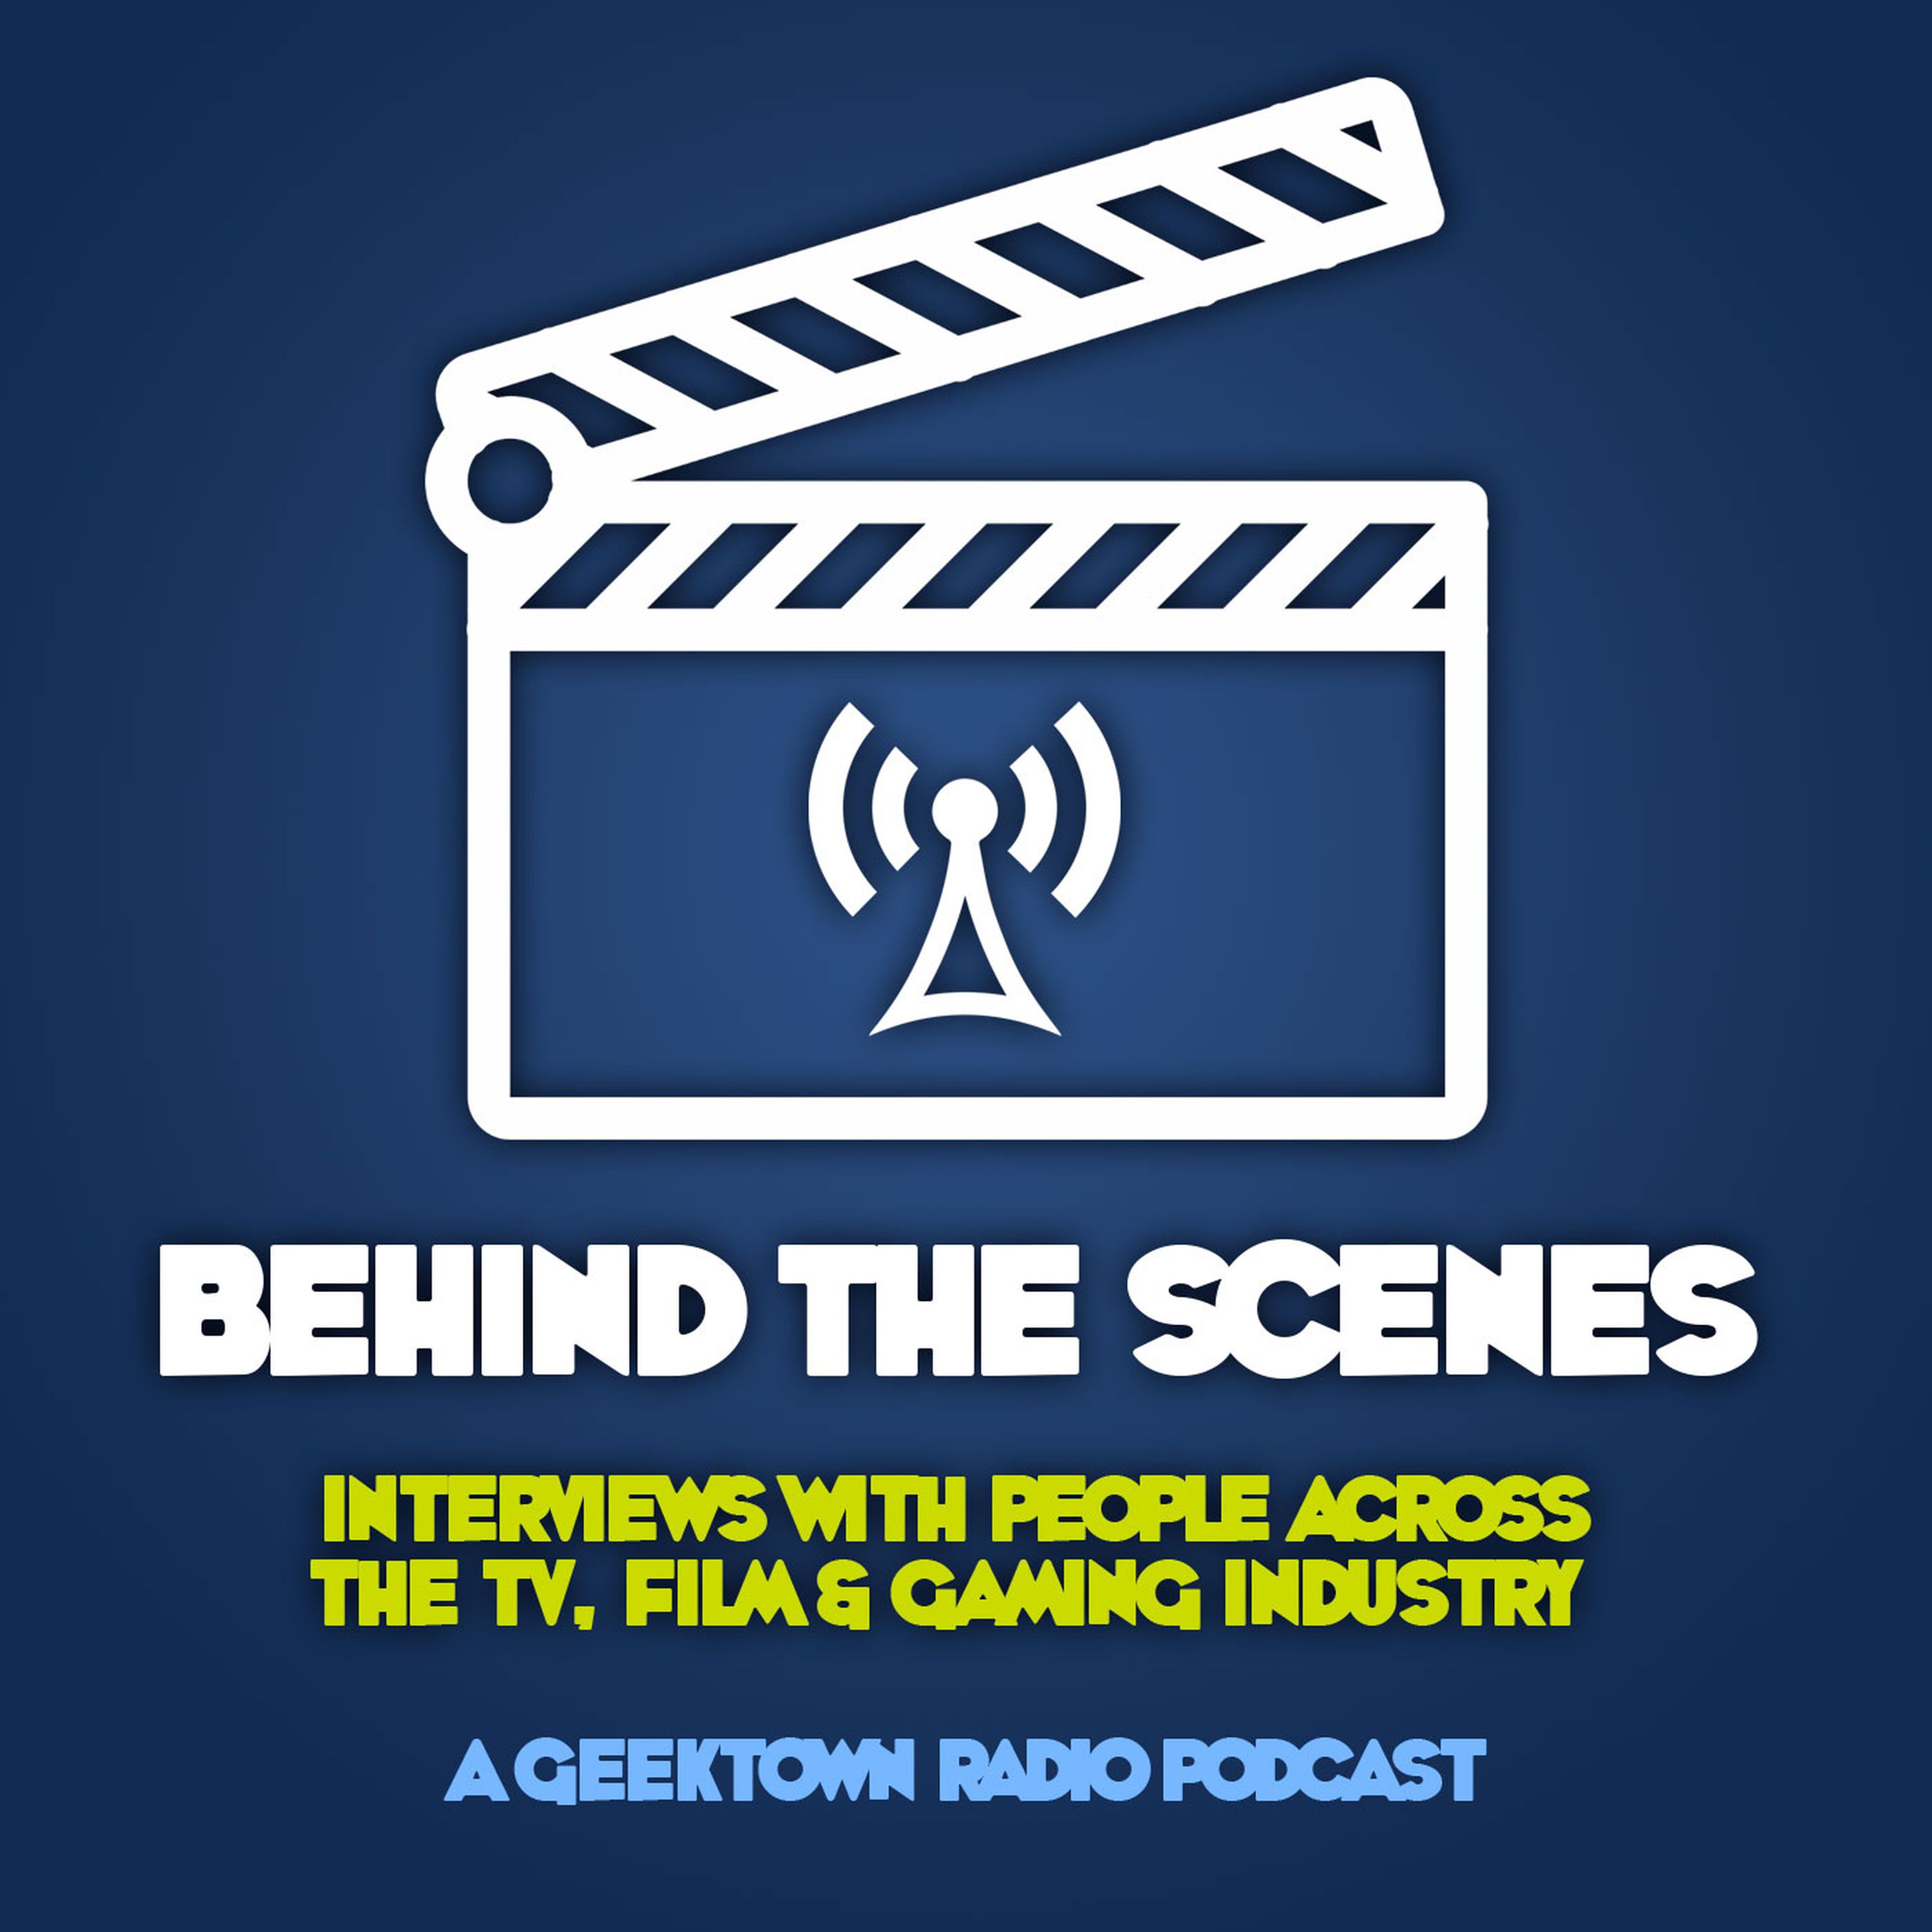 Geektown Behind The Scenes Podcast 07: Composer Jordan Gagne Interview - 'Altered Carbon', 'The Rookie', 'Treadstone'